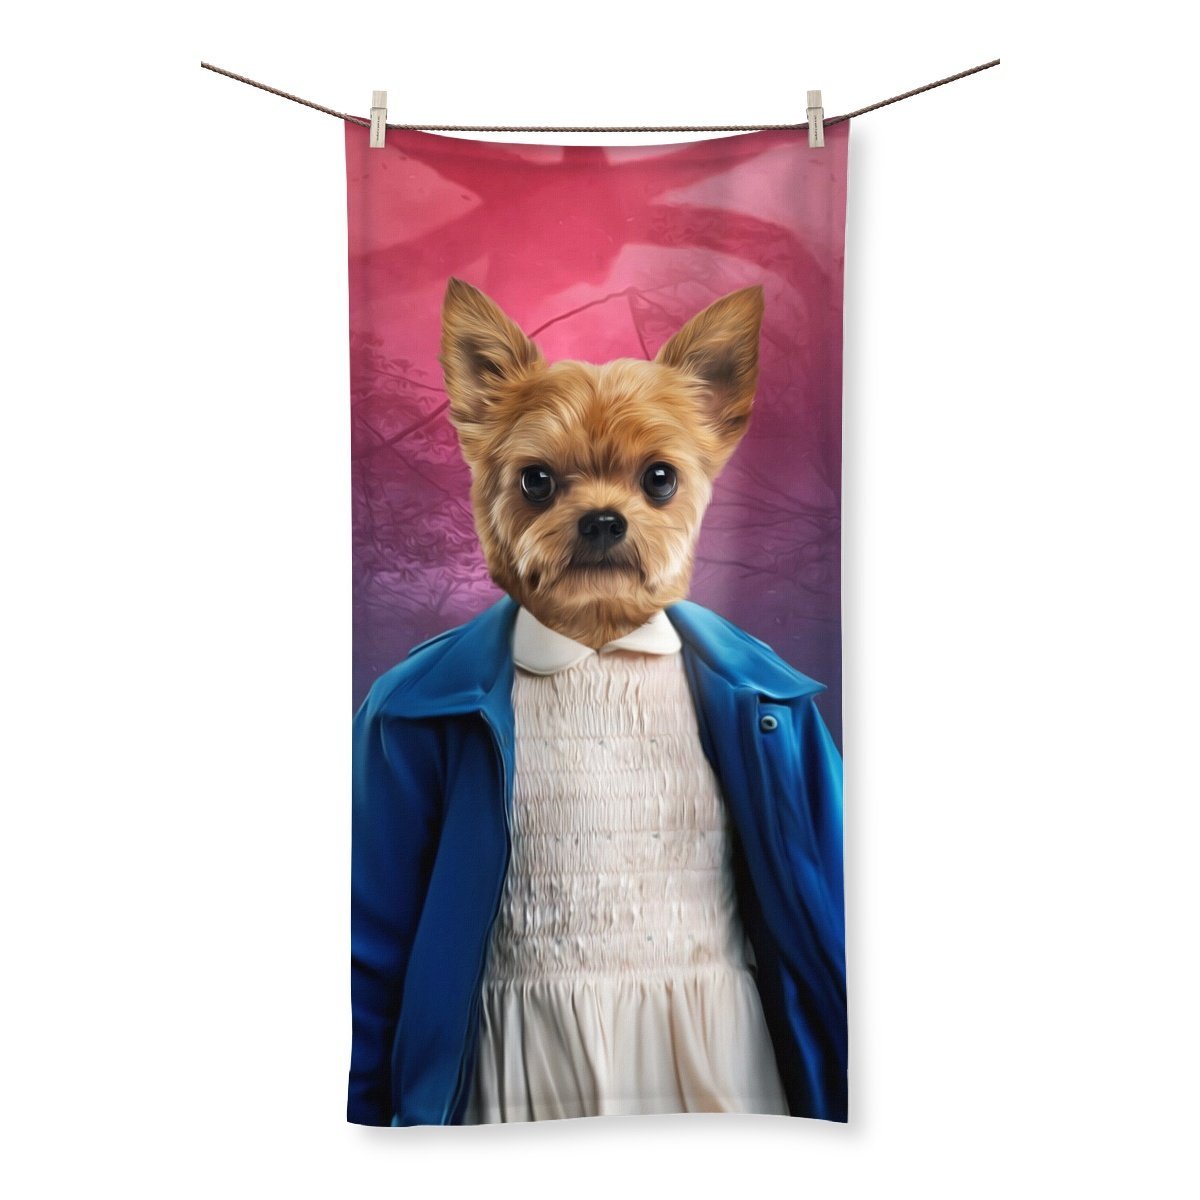 Eleven (Stranger Things Inspired): Custom Pet Towel - Paw & Glory - #pet portraits# - #dog portraits# - #pet portraits uk#Paw & Glory, paw and glory, dog astronaut photo, dog drawing from photo, draw your pet portrait, dog portraits singapore, cat picture painting, custom dog painting, pet portrait,pet art Towel,